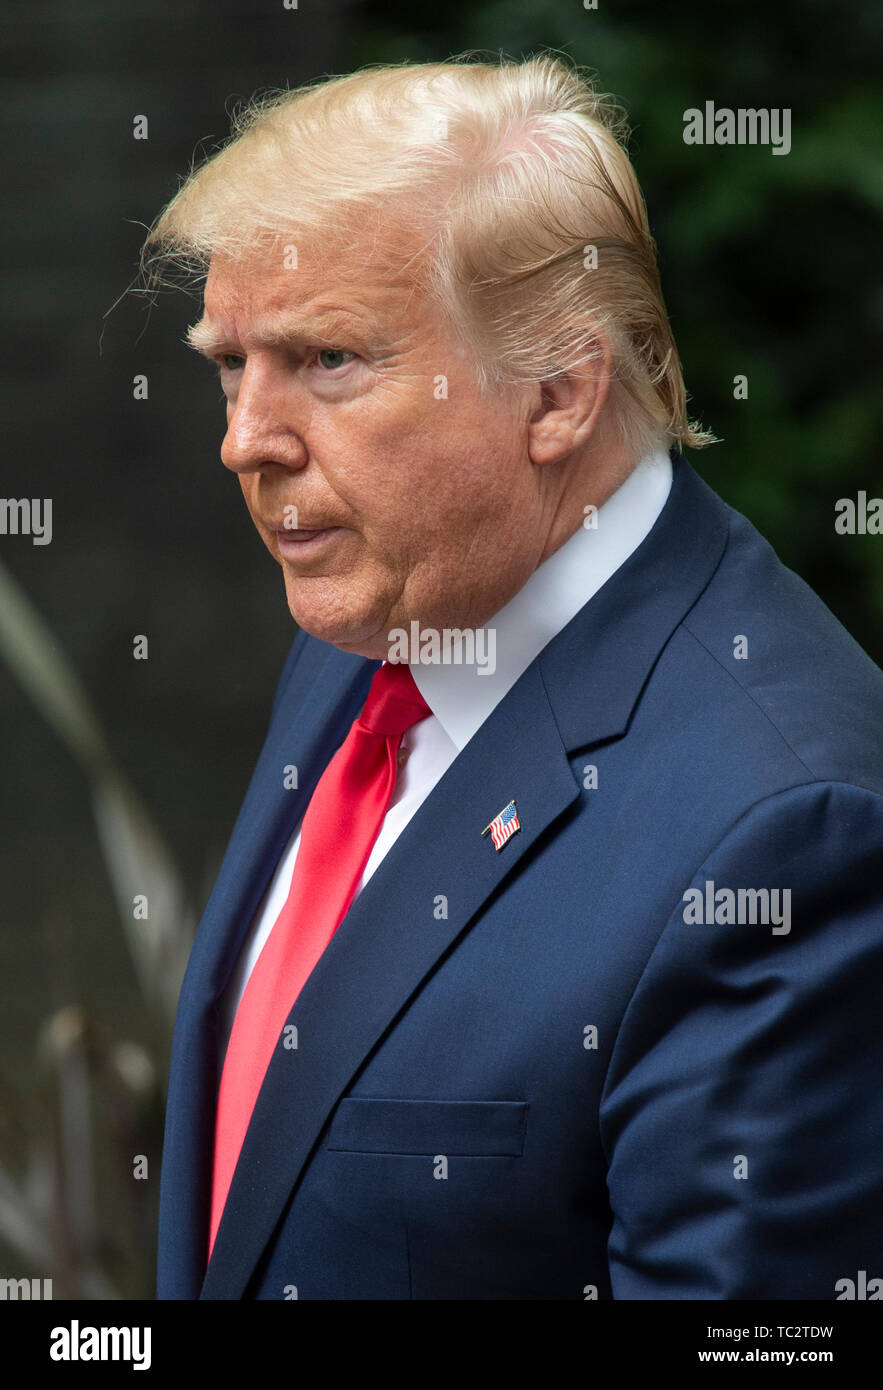 LONDON, ENGLAND - JUNE 04 2019:  US President Donald Trump at 10 Downing street for a meeting on the second day of the U.S. President and First Lady's three-day State visit. Gary Mitchell/Alamy Live News Stock Photo